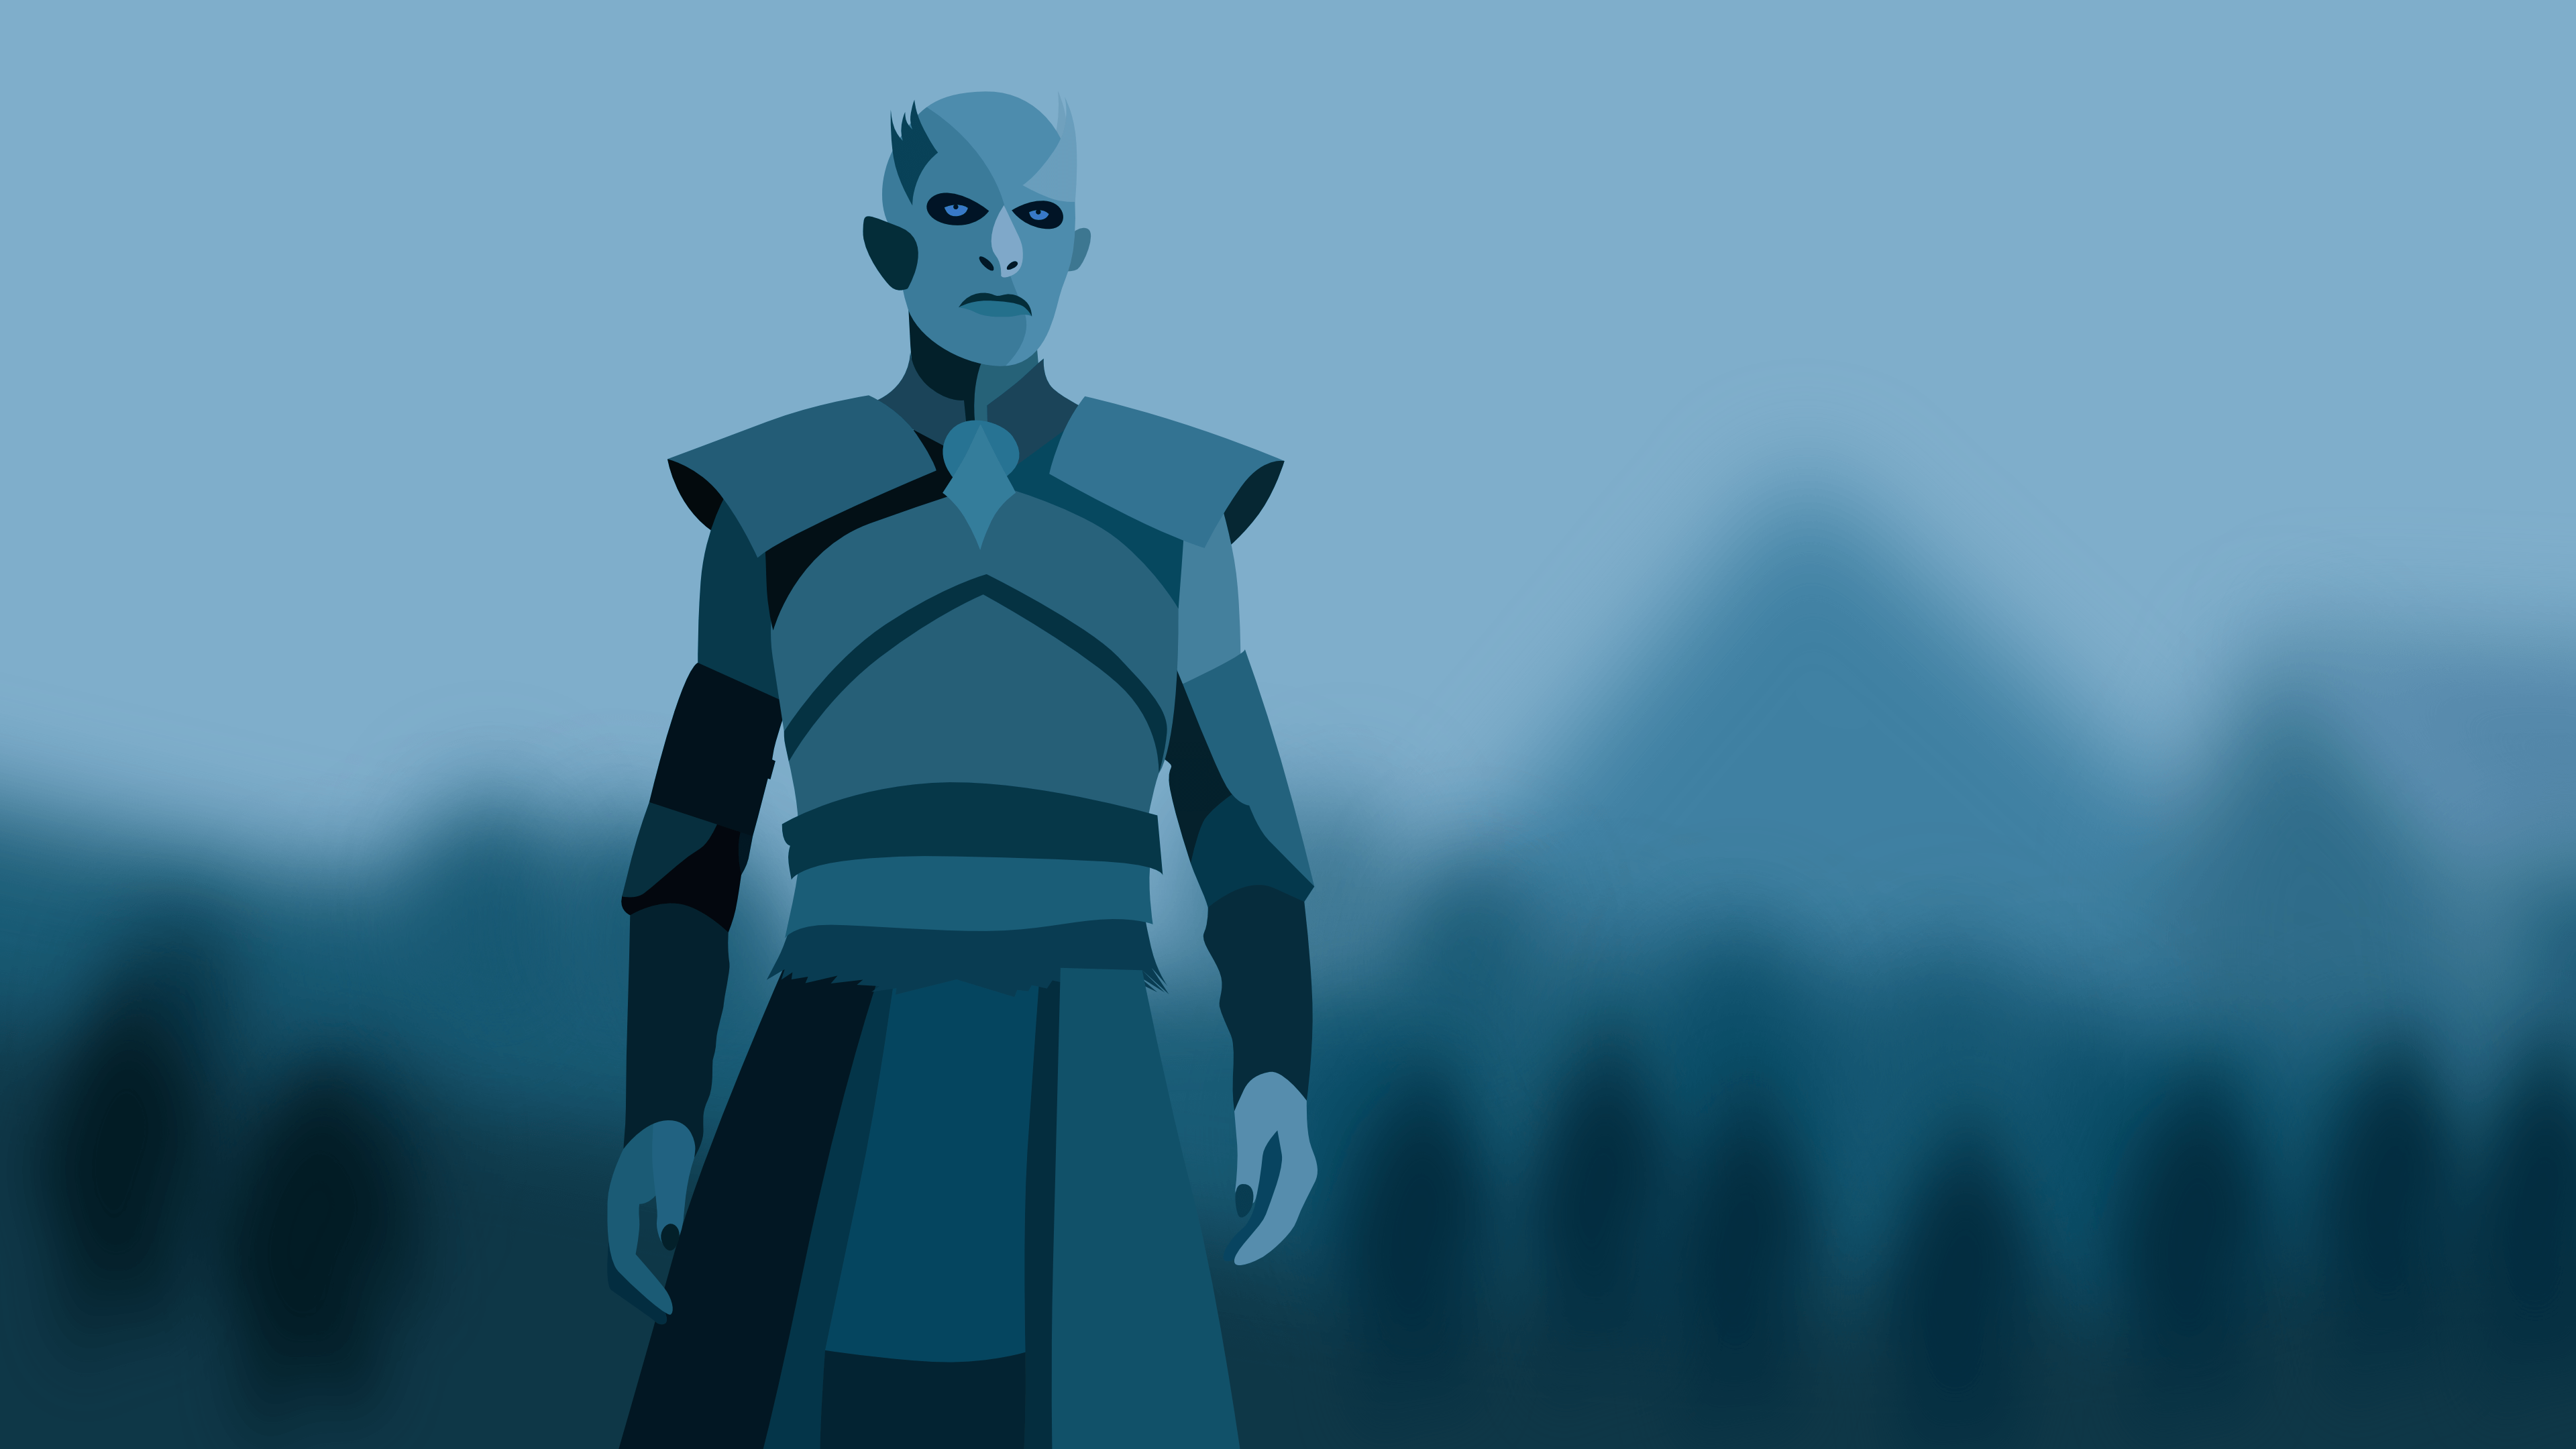 Night King Minimalist From Game Of Thrones Wallpapers